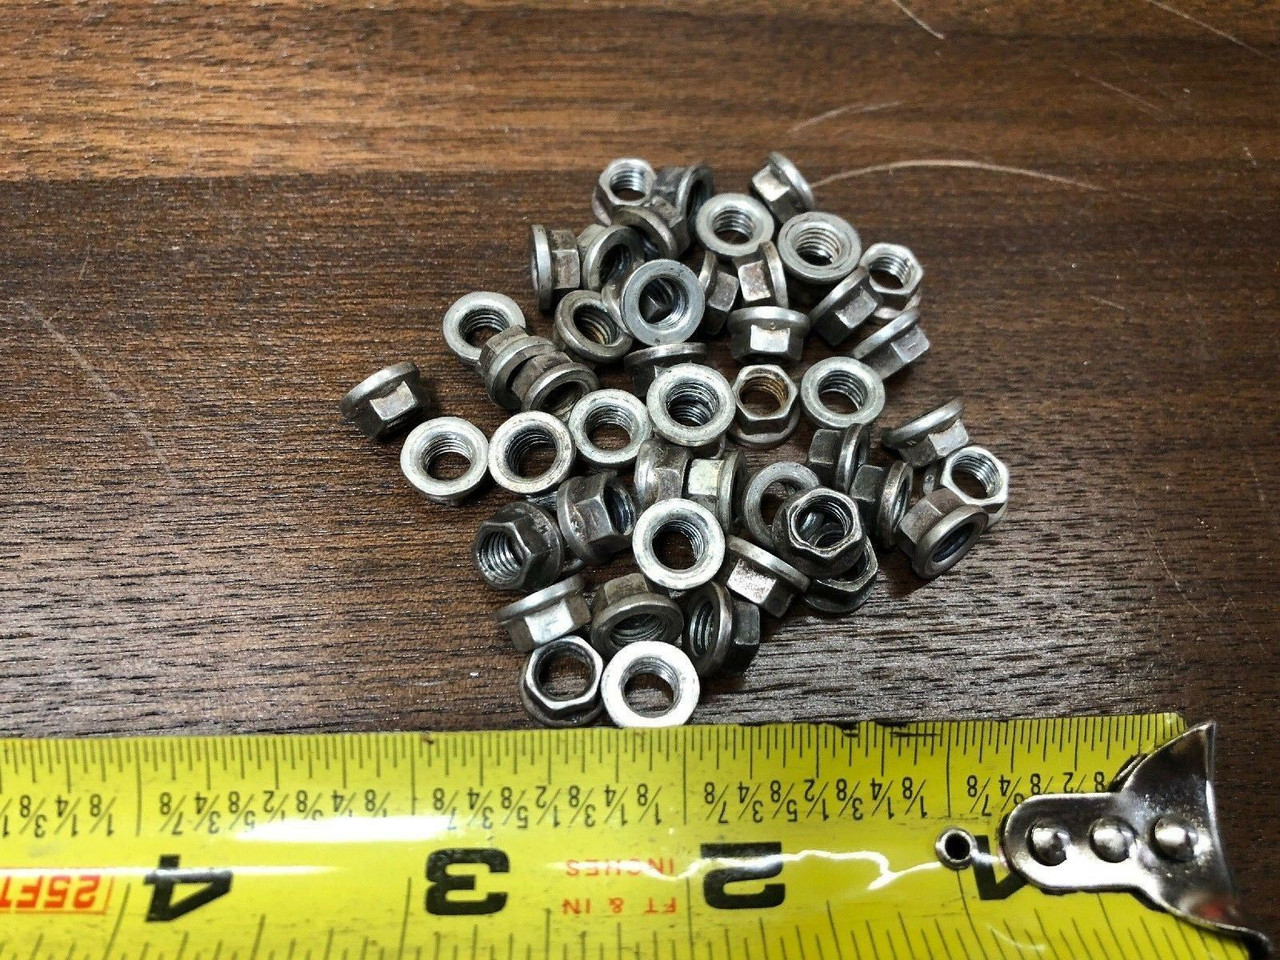 Extended Washer Self-Locking Nut 5310008444872 Lot of 50